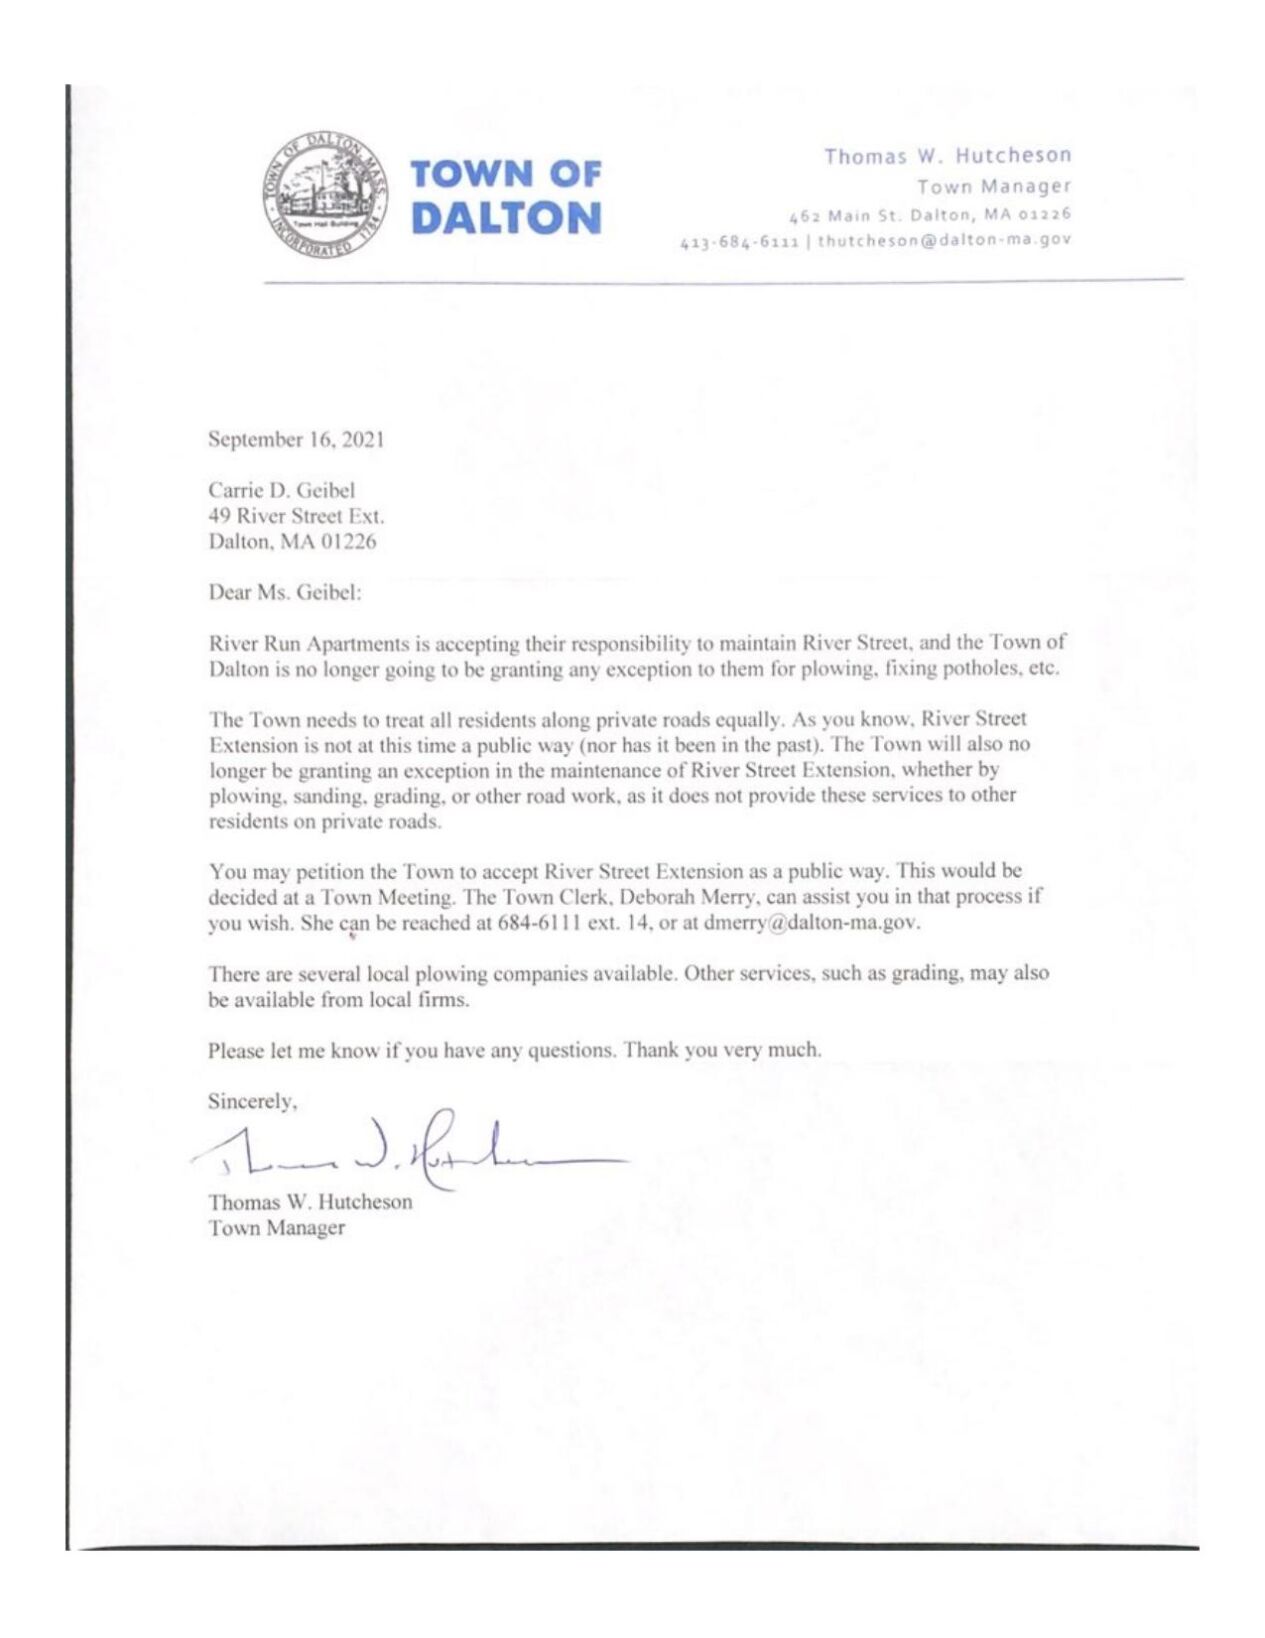 Town of Dalton letter on River Street Extension